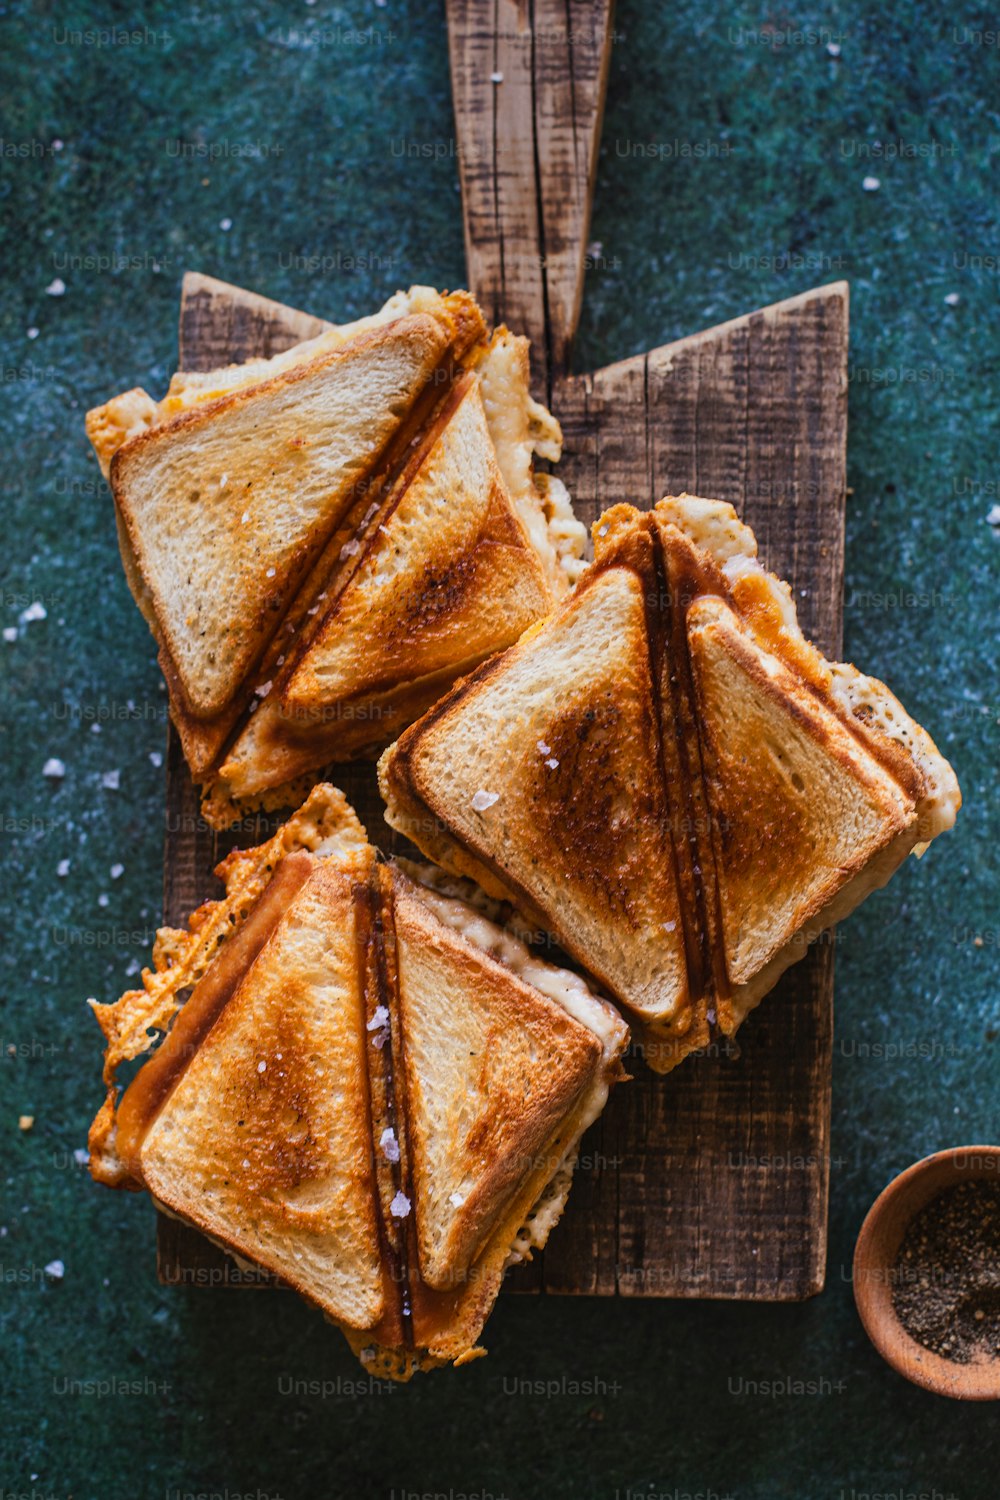 four grilled sandwiches on a cutting board with a wooden spoon